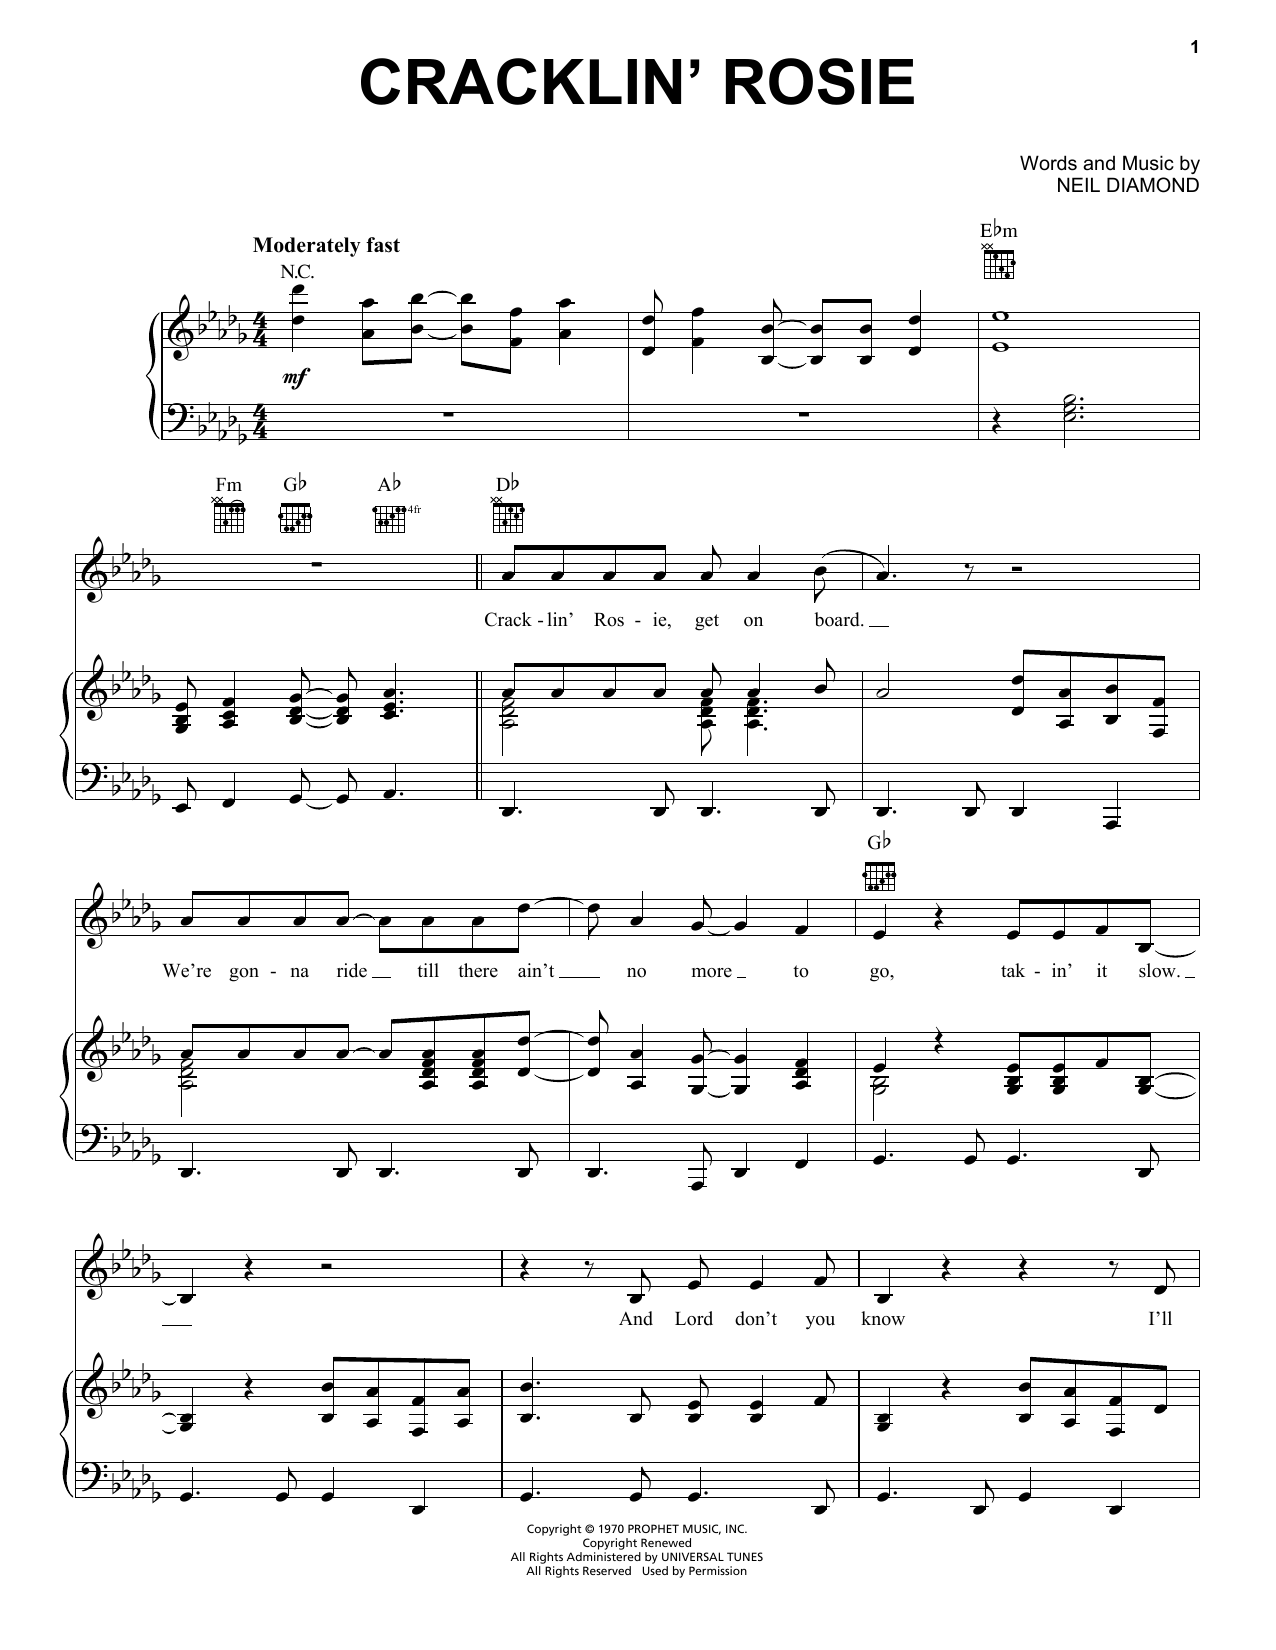 Download Neil Diamond Cracklin' Rosie sheet music notes and chords for Piano, Vocal & Guitar (Right-Hand Melody) - Download Printable PDF and start playing in minutes.